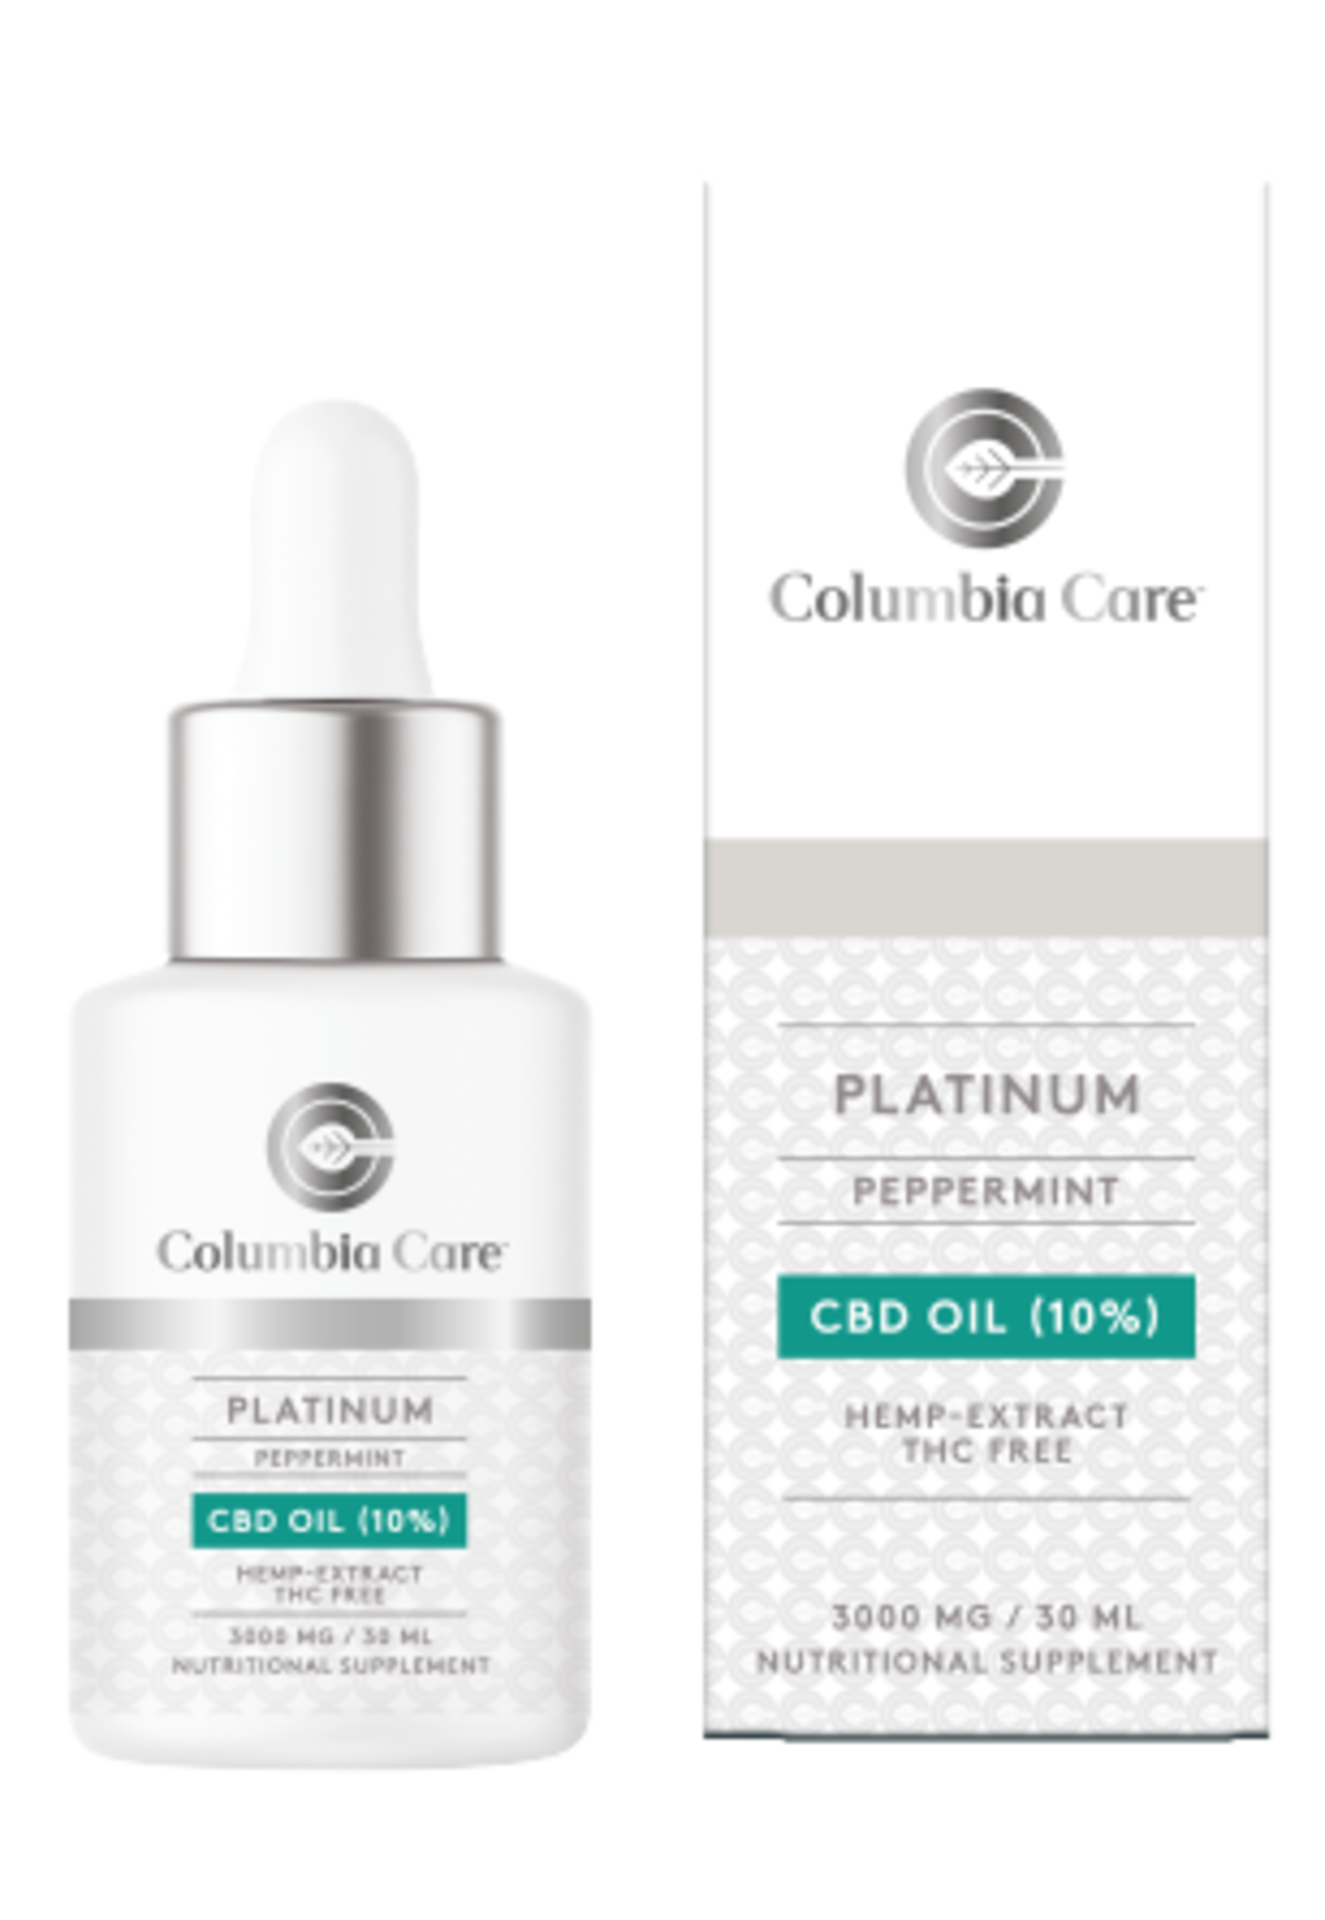 2 x Brand New Columbia Care Platinum Peppermint Flavored Tincture 30ml 3000mg. Columbia Care, a